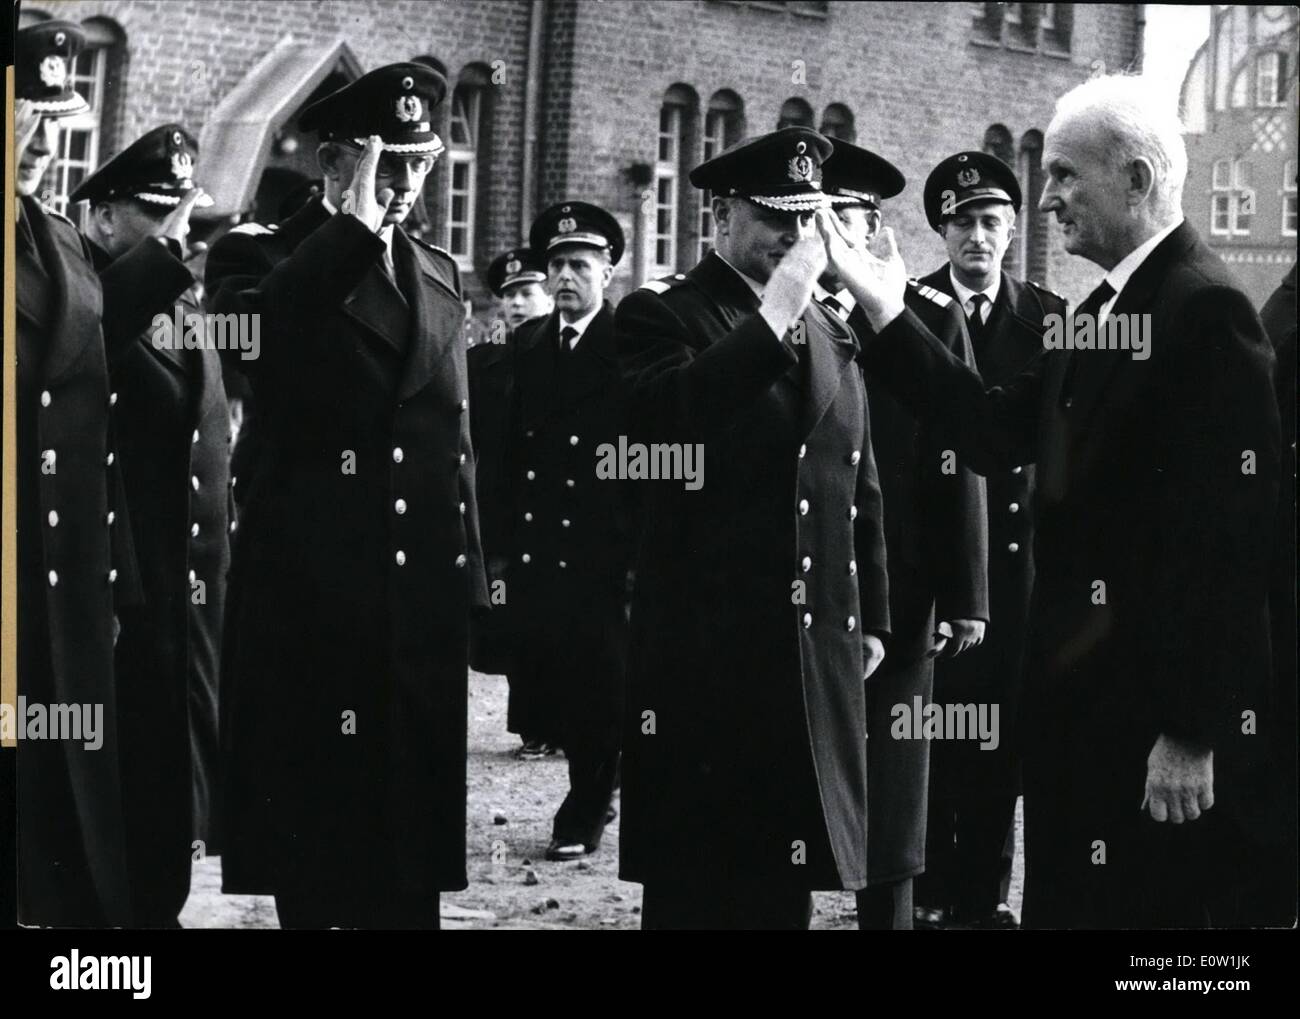 Nov. 12, 1960 - Old War follows... When the former commander in chief of the German Kriegsmarine during the Dritte Reich Grossadmirai KARL Donitz, condemned in the Nuremberg war criminal orrii10-to the funeral 6' Ms former prede7 cesscr, Grossadmiral Lrich RAEOERcat the cematery at Kiel, he was saluted by officers of new German Navy, No official delegation of German Navy was cent lo the funeral but only officers who had direct connections with the former commander in Stock Photo